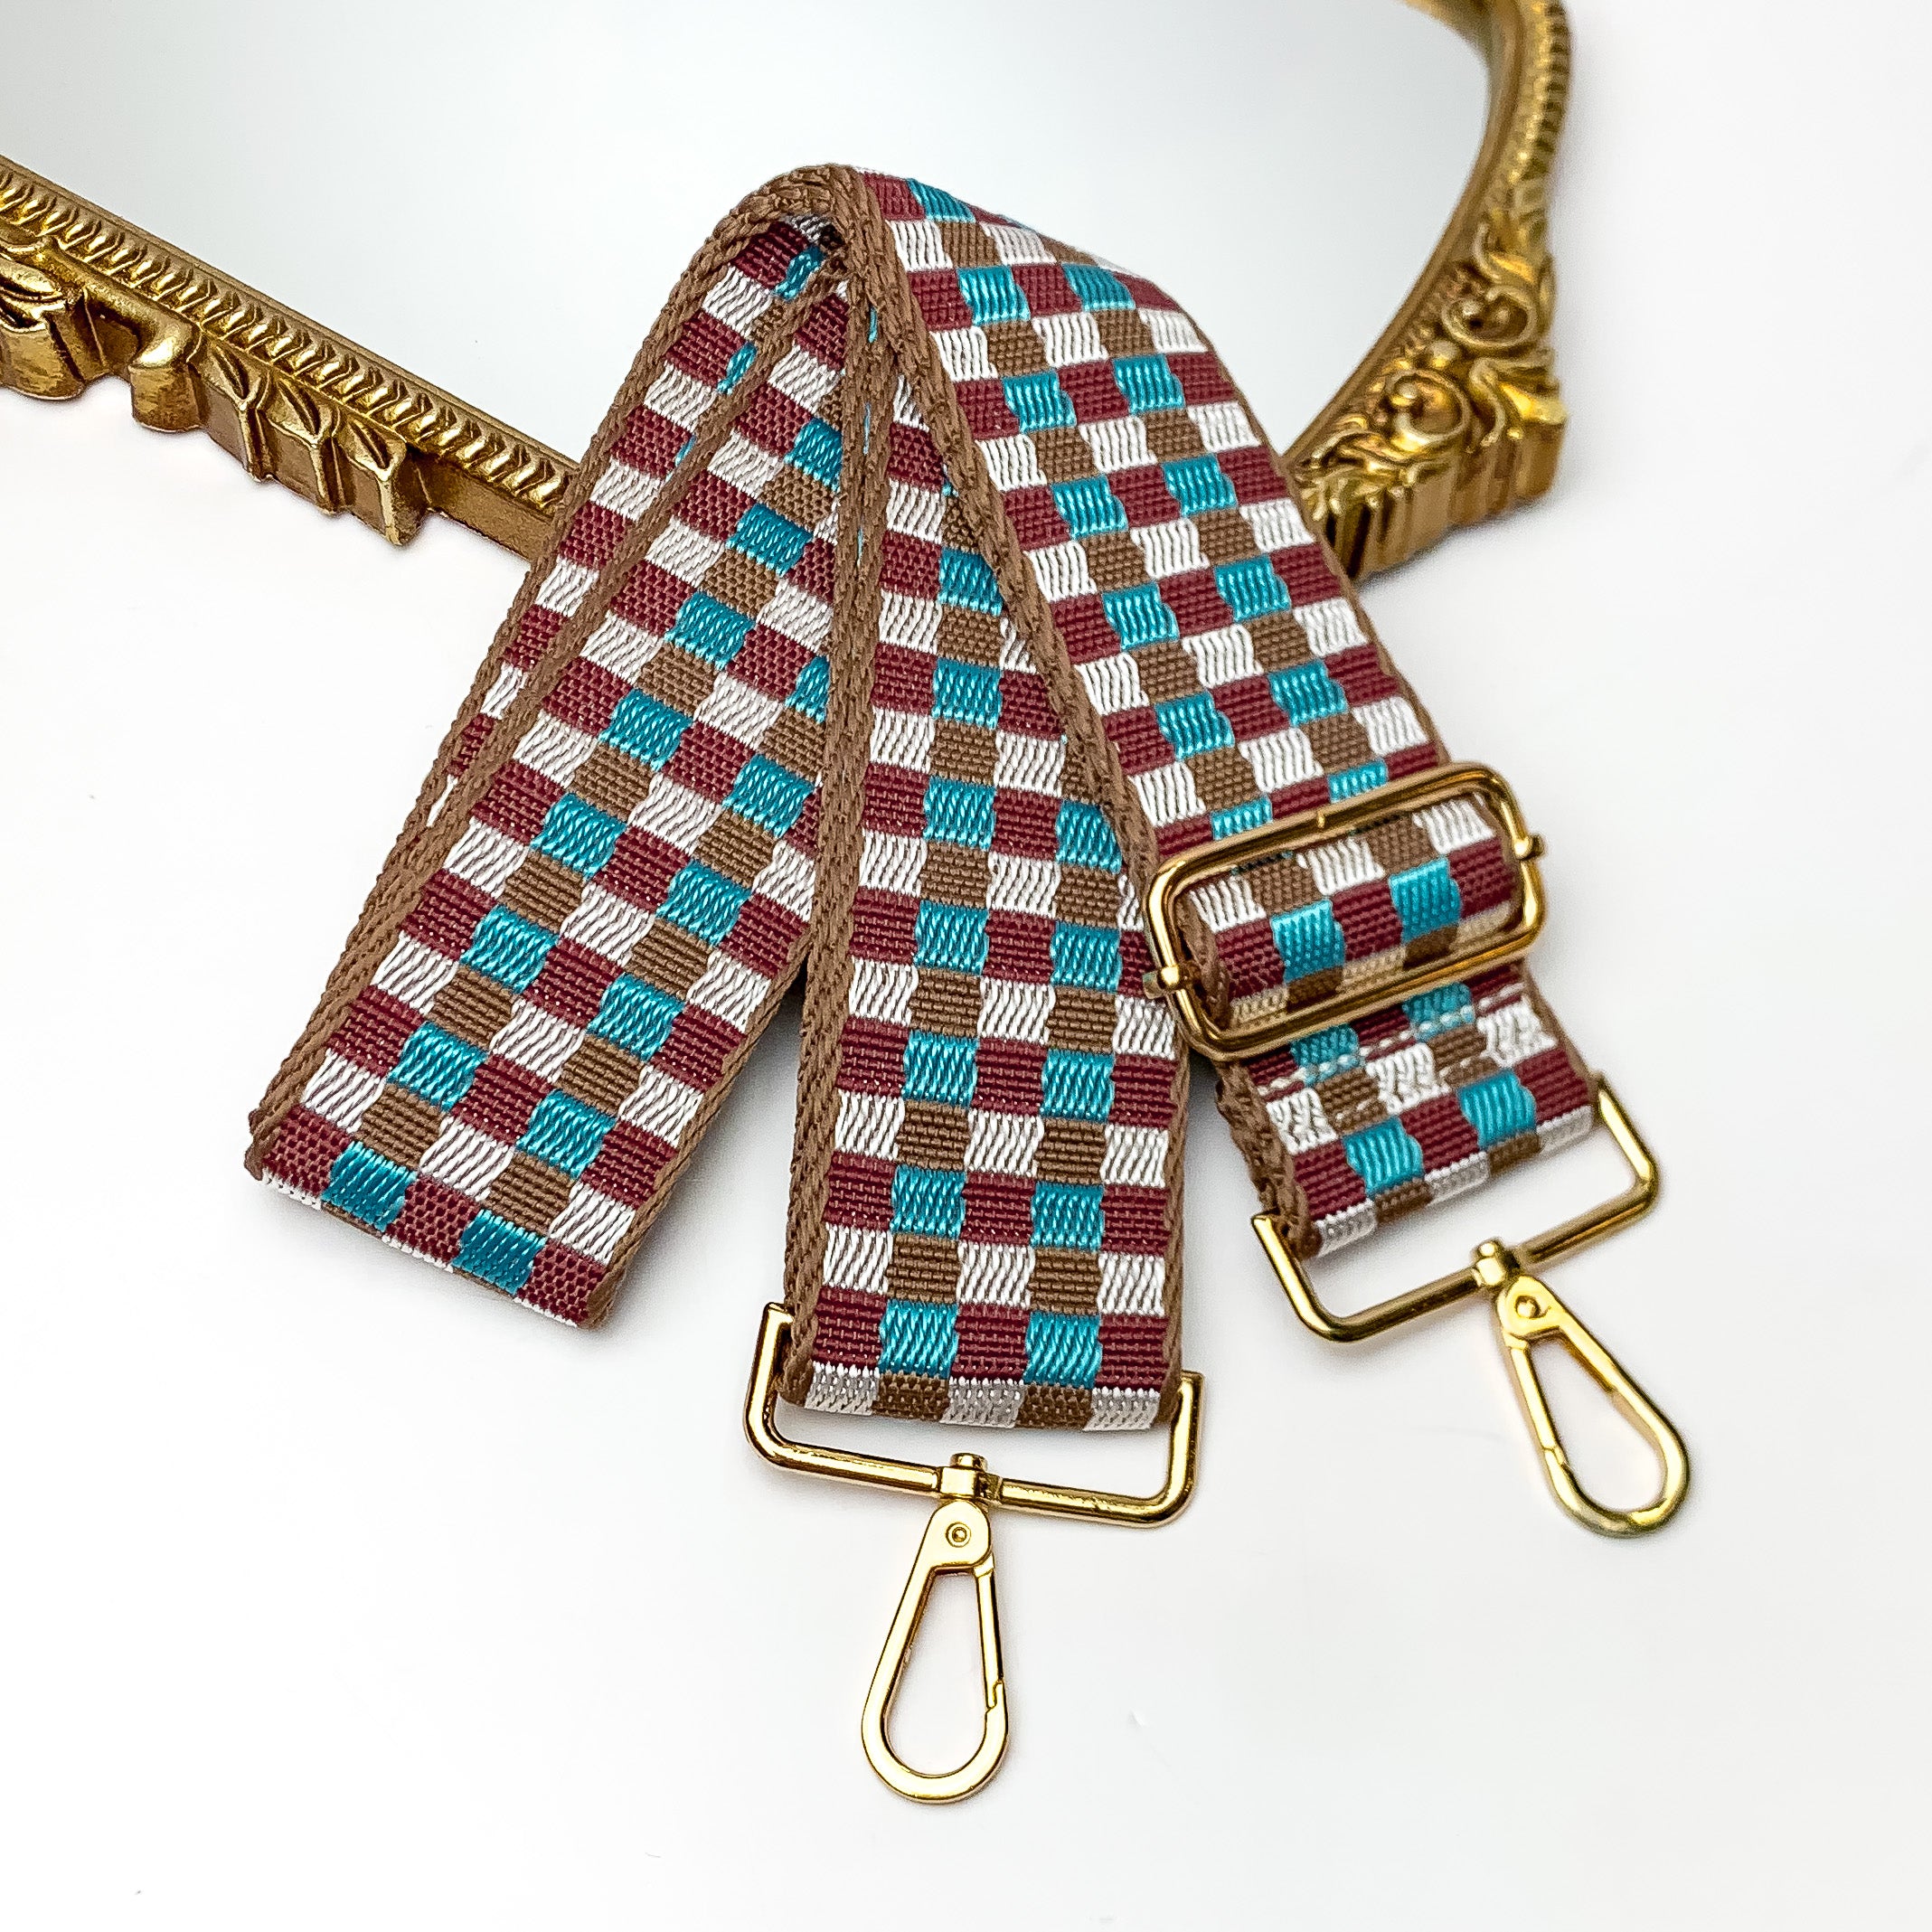 Checkered Adjustable Purse Strap in Brown and Blue. This purse strap is pictured on a white background with a gold trimmed mirror in the corner.